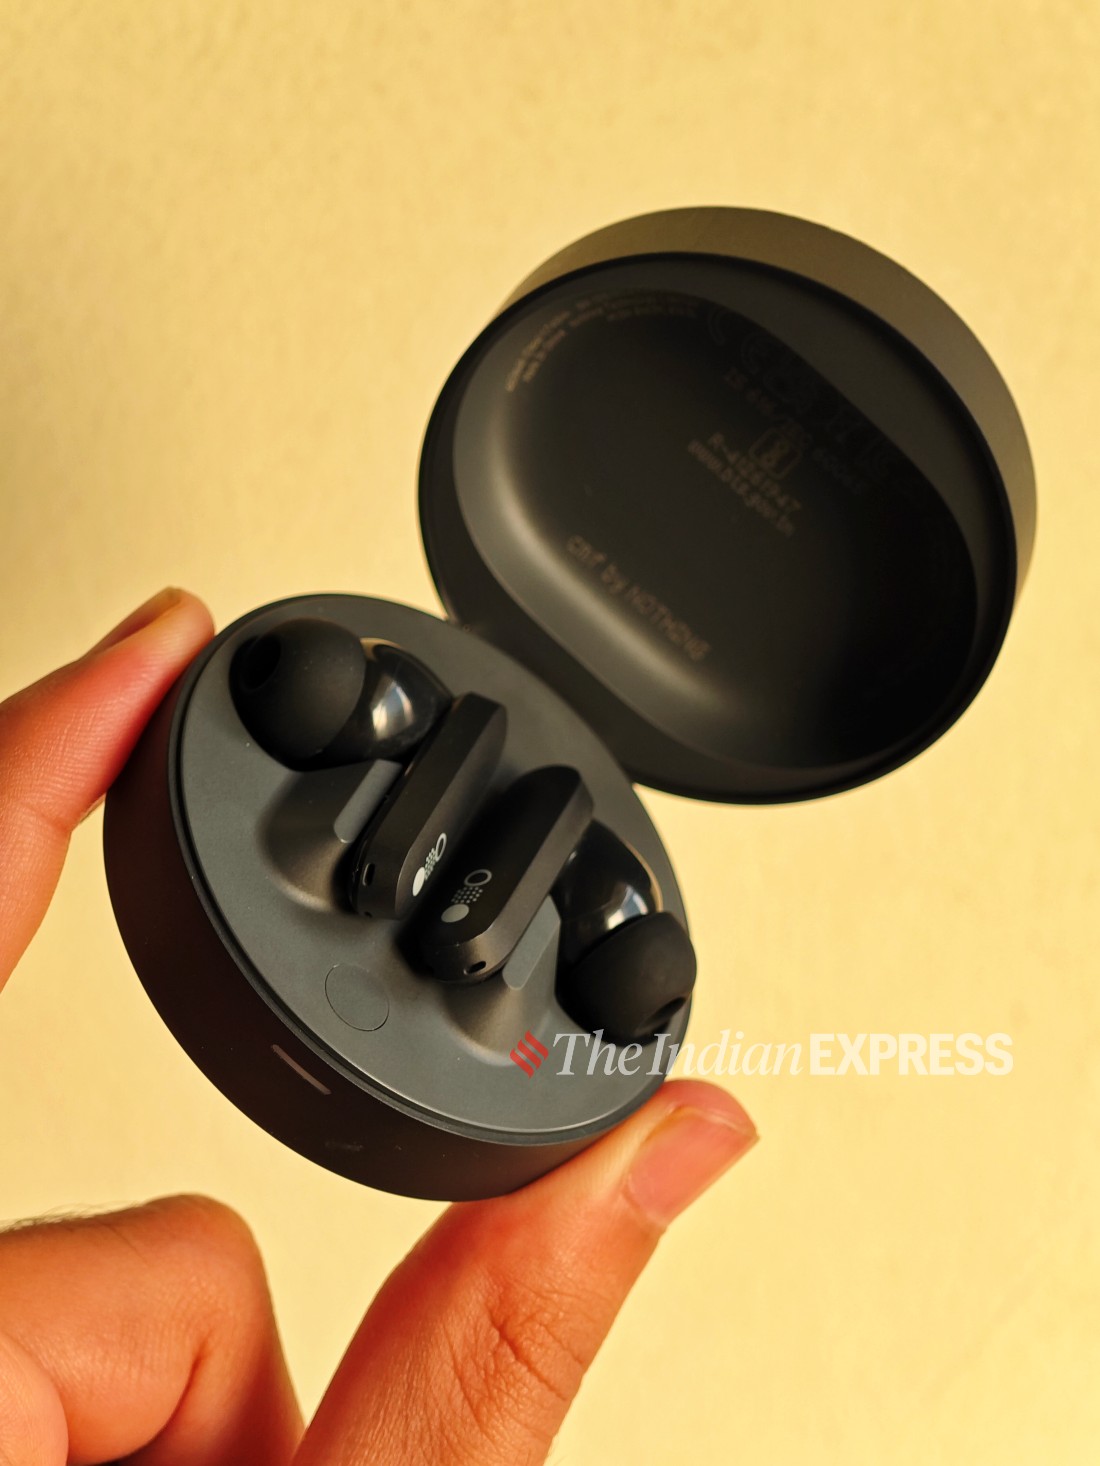 CMF by Nothing Buds Pro review: No-frills but capable earbuds on budget